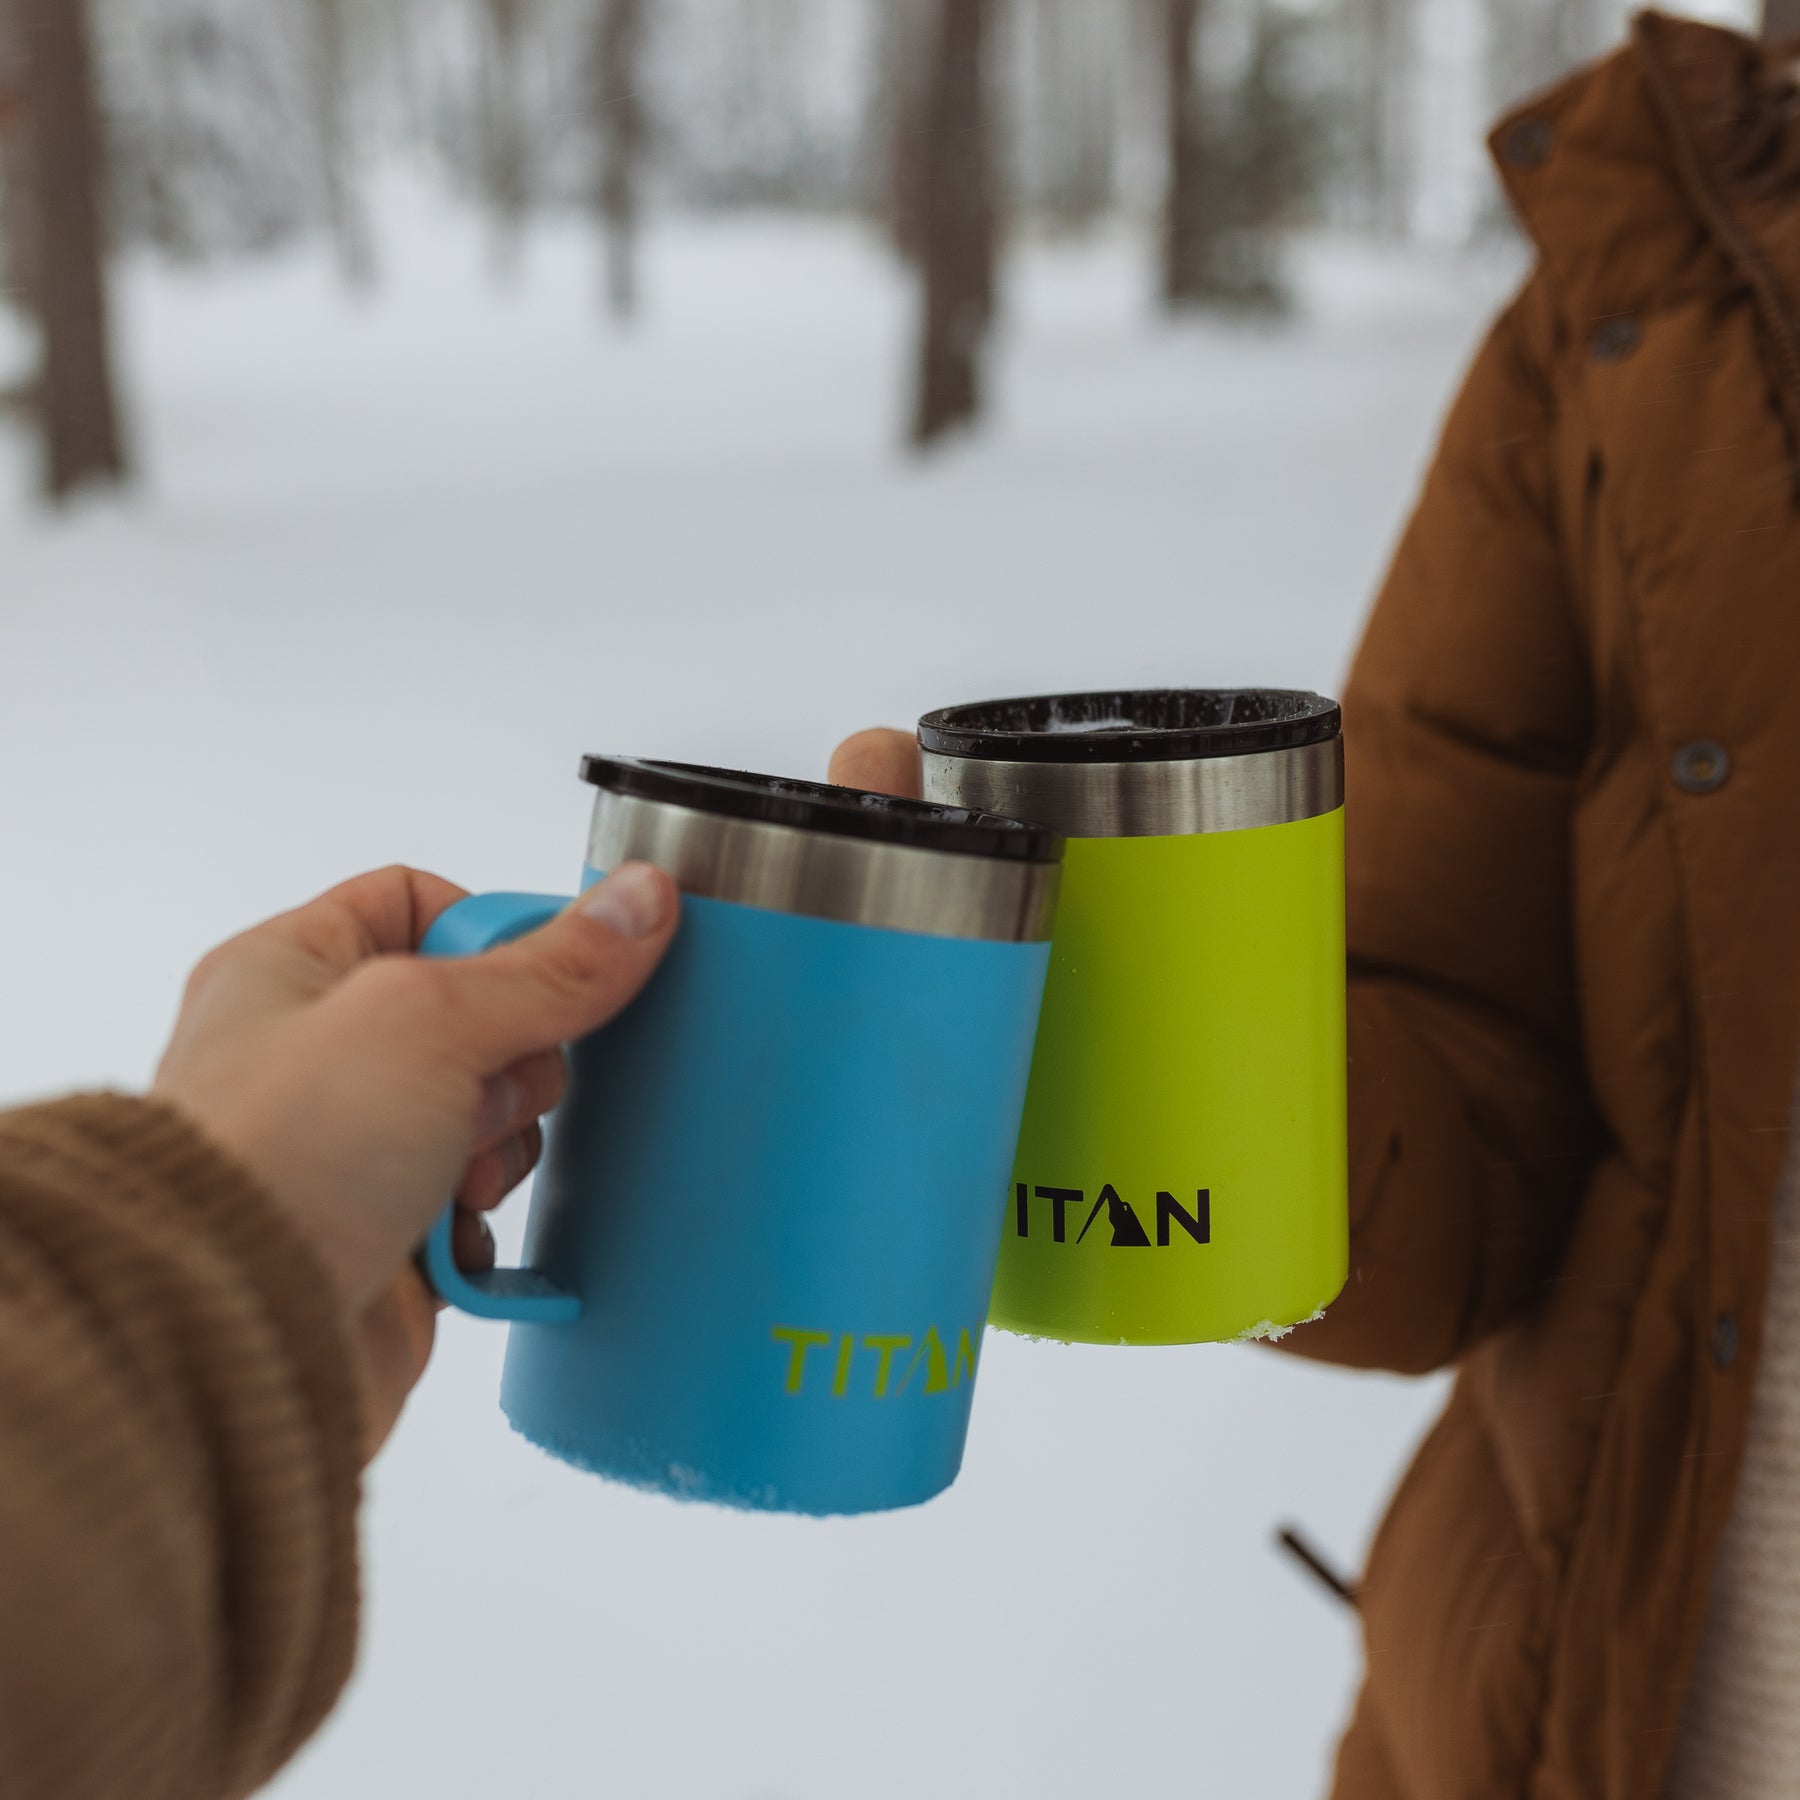 14 oz. Stainless Steel Mug with Microban Infused Lid* Blue Lagoon by Arctic Zone